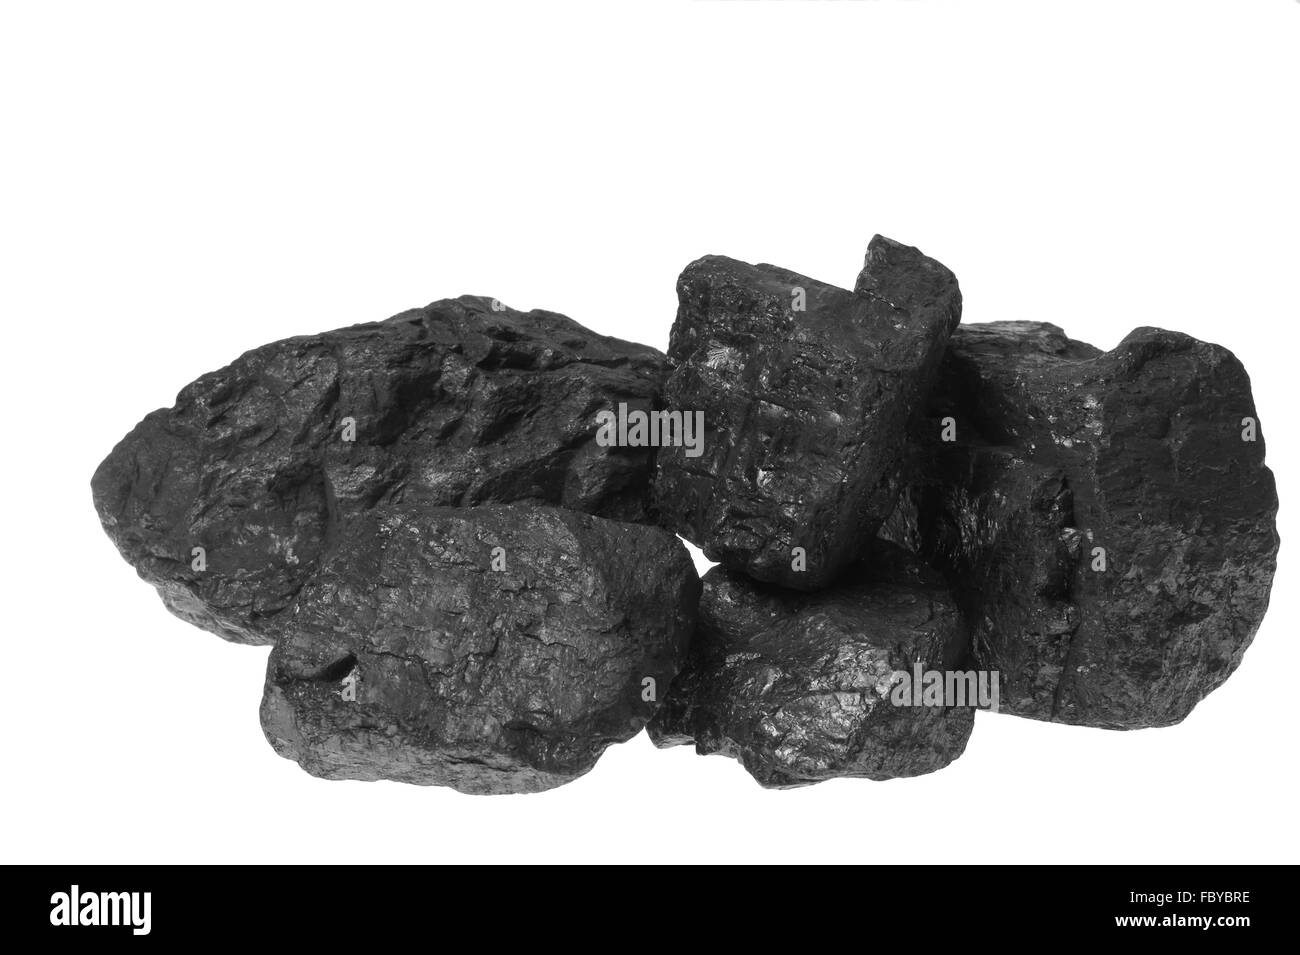 coal, carbon nuggets Stock Photo